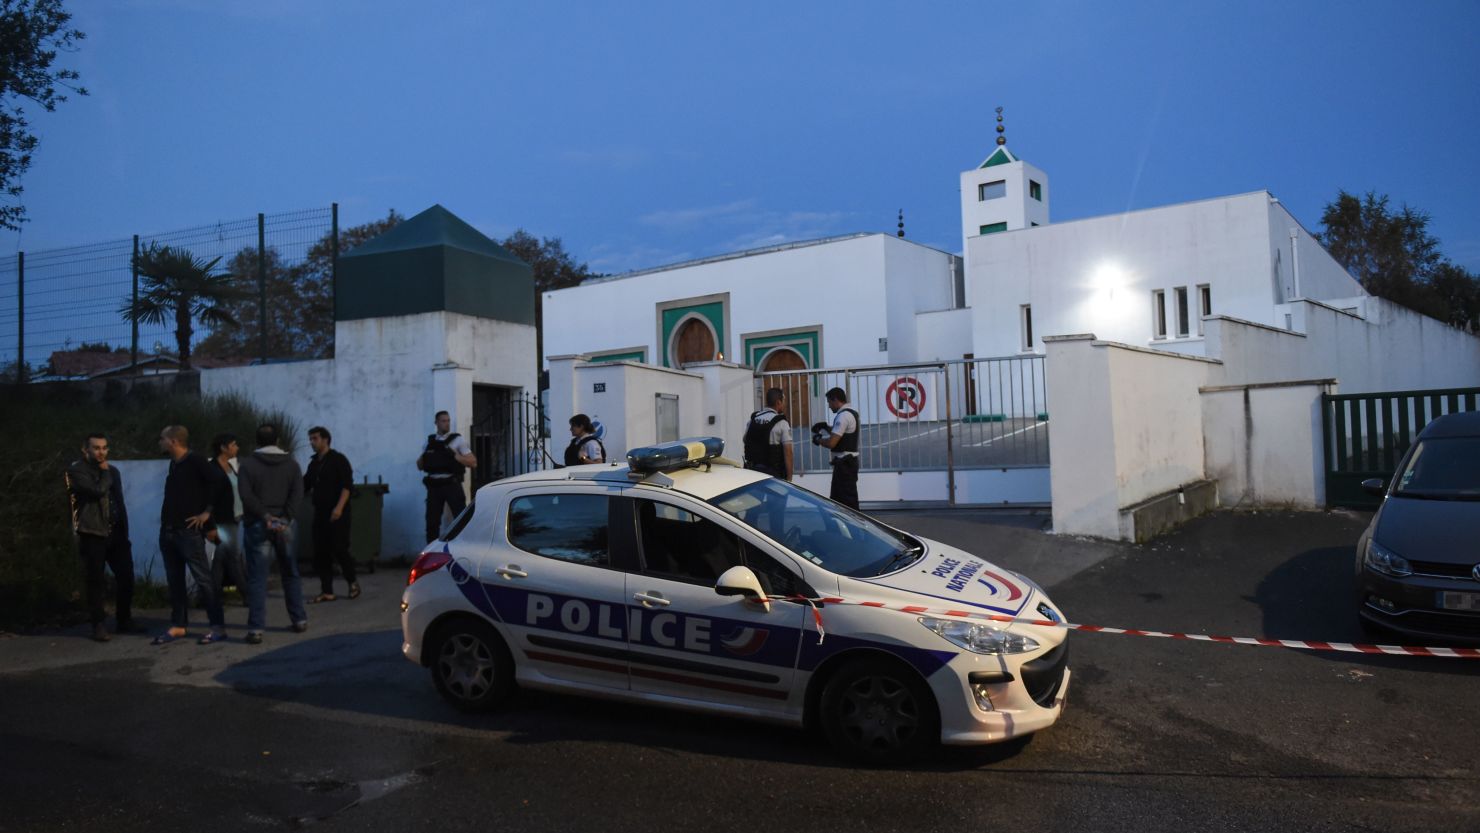 Police officers stand in front of the Mosque of Bayonne after two people were injured in a shooting.